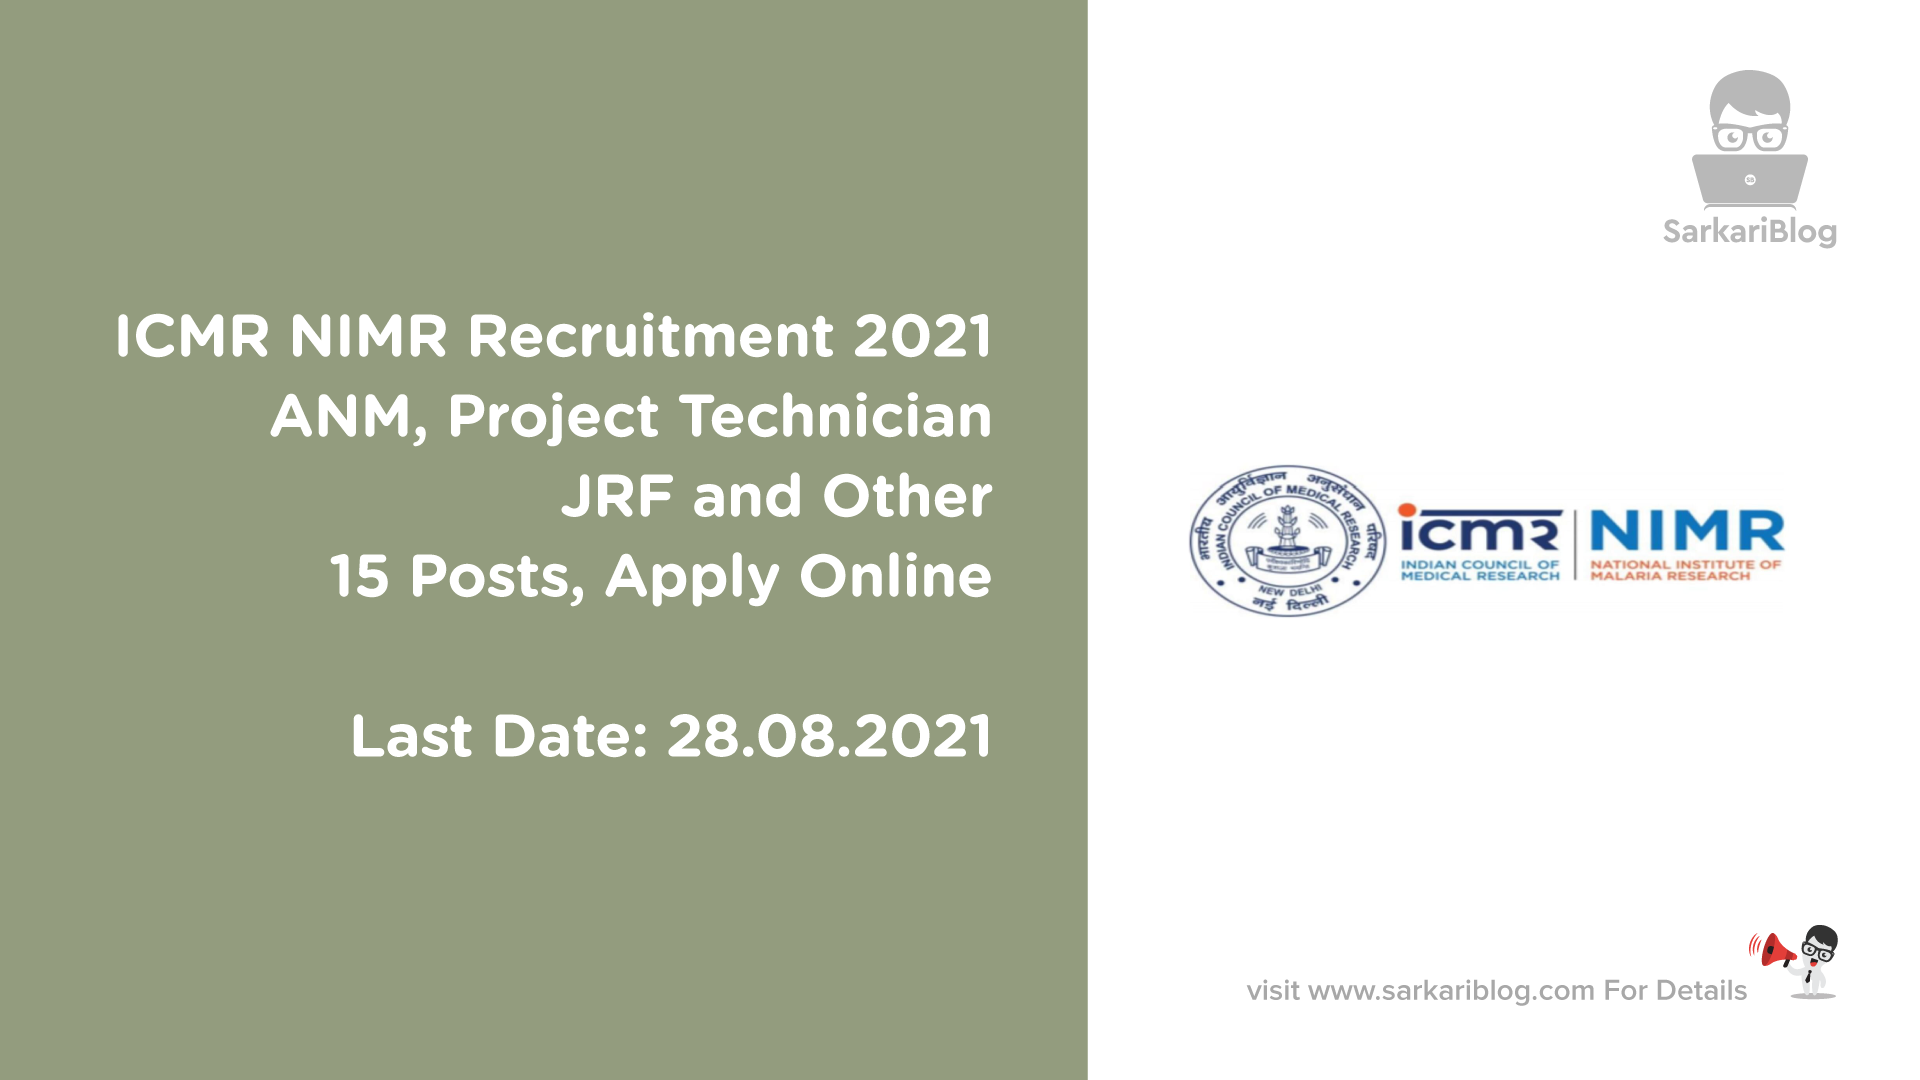 ICMR NIMR Recruitment 2021, ANM, Project Technician, JRF and Other, 15 Posts, Apply Online